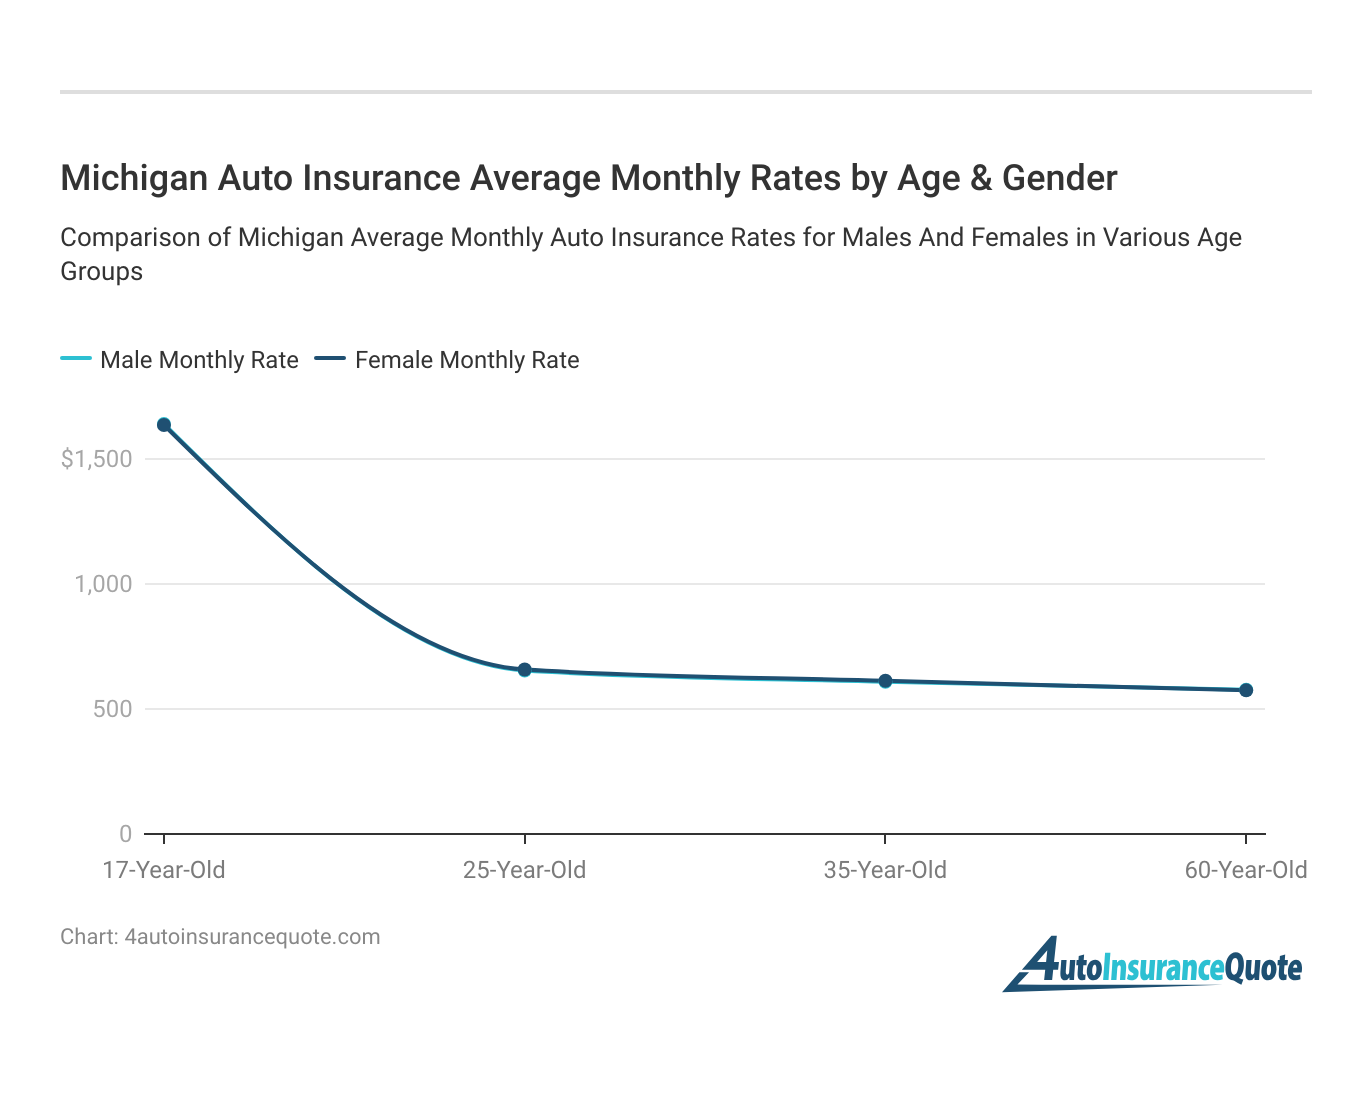 <h3>Michigan Auto Insurance Average Monthly Rates by Age & Gender</h3>